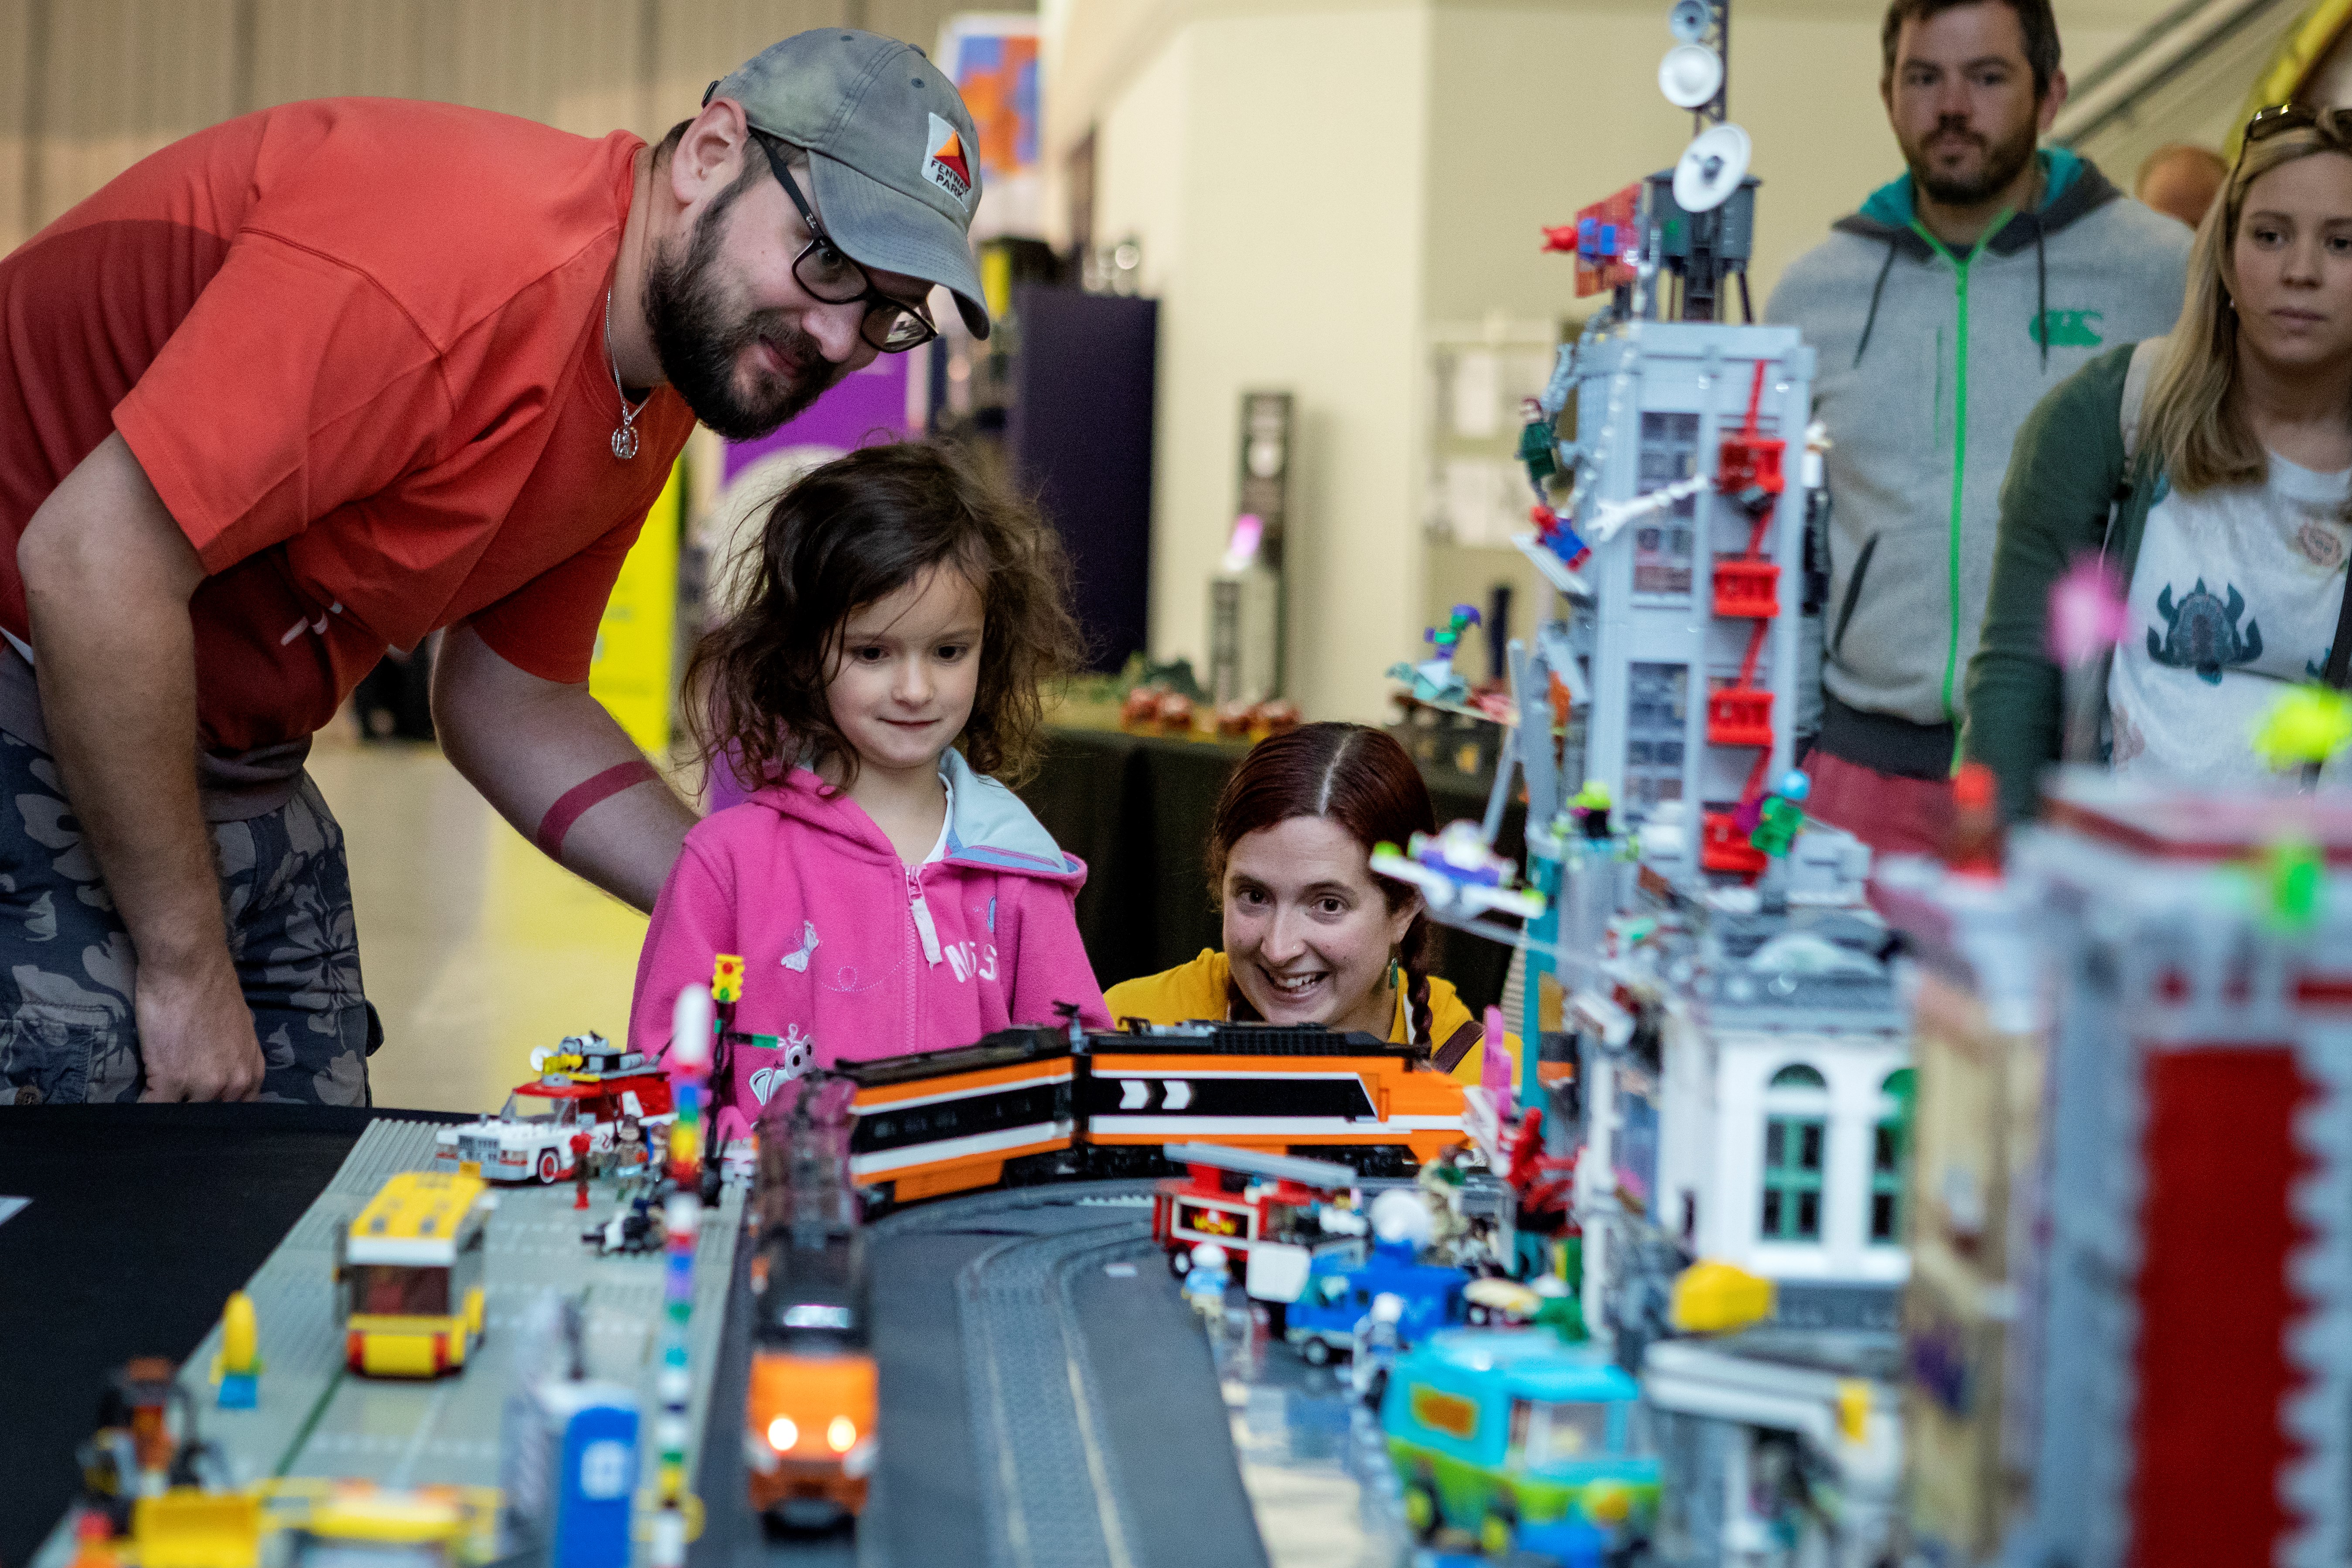 Two adults and a child look at Lego models on a table.